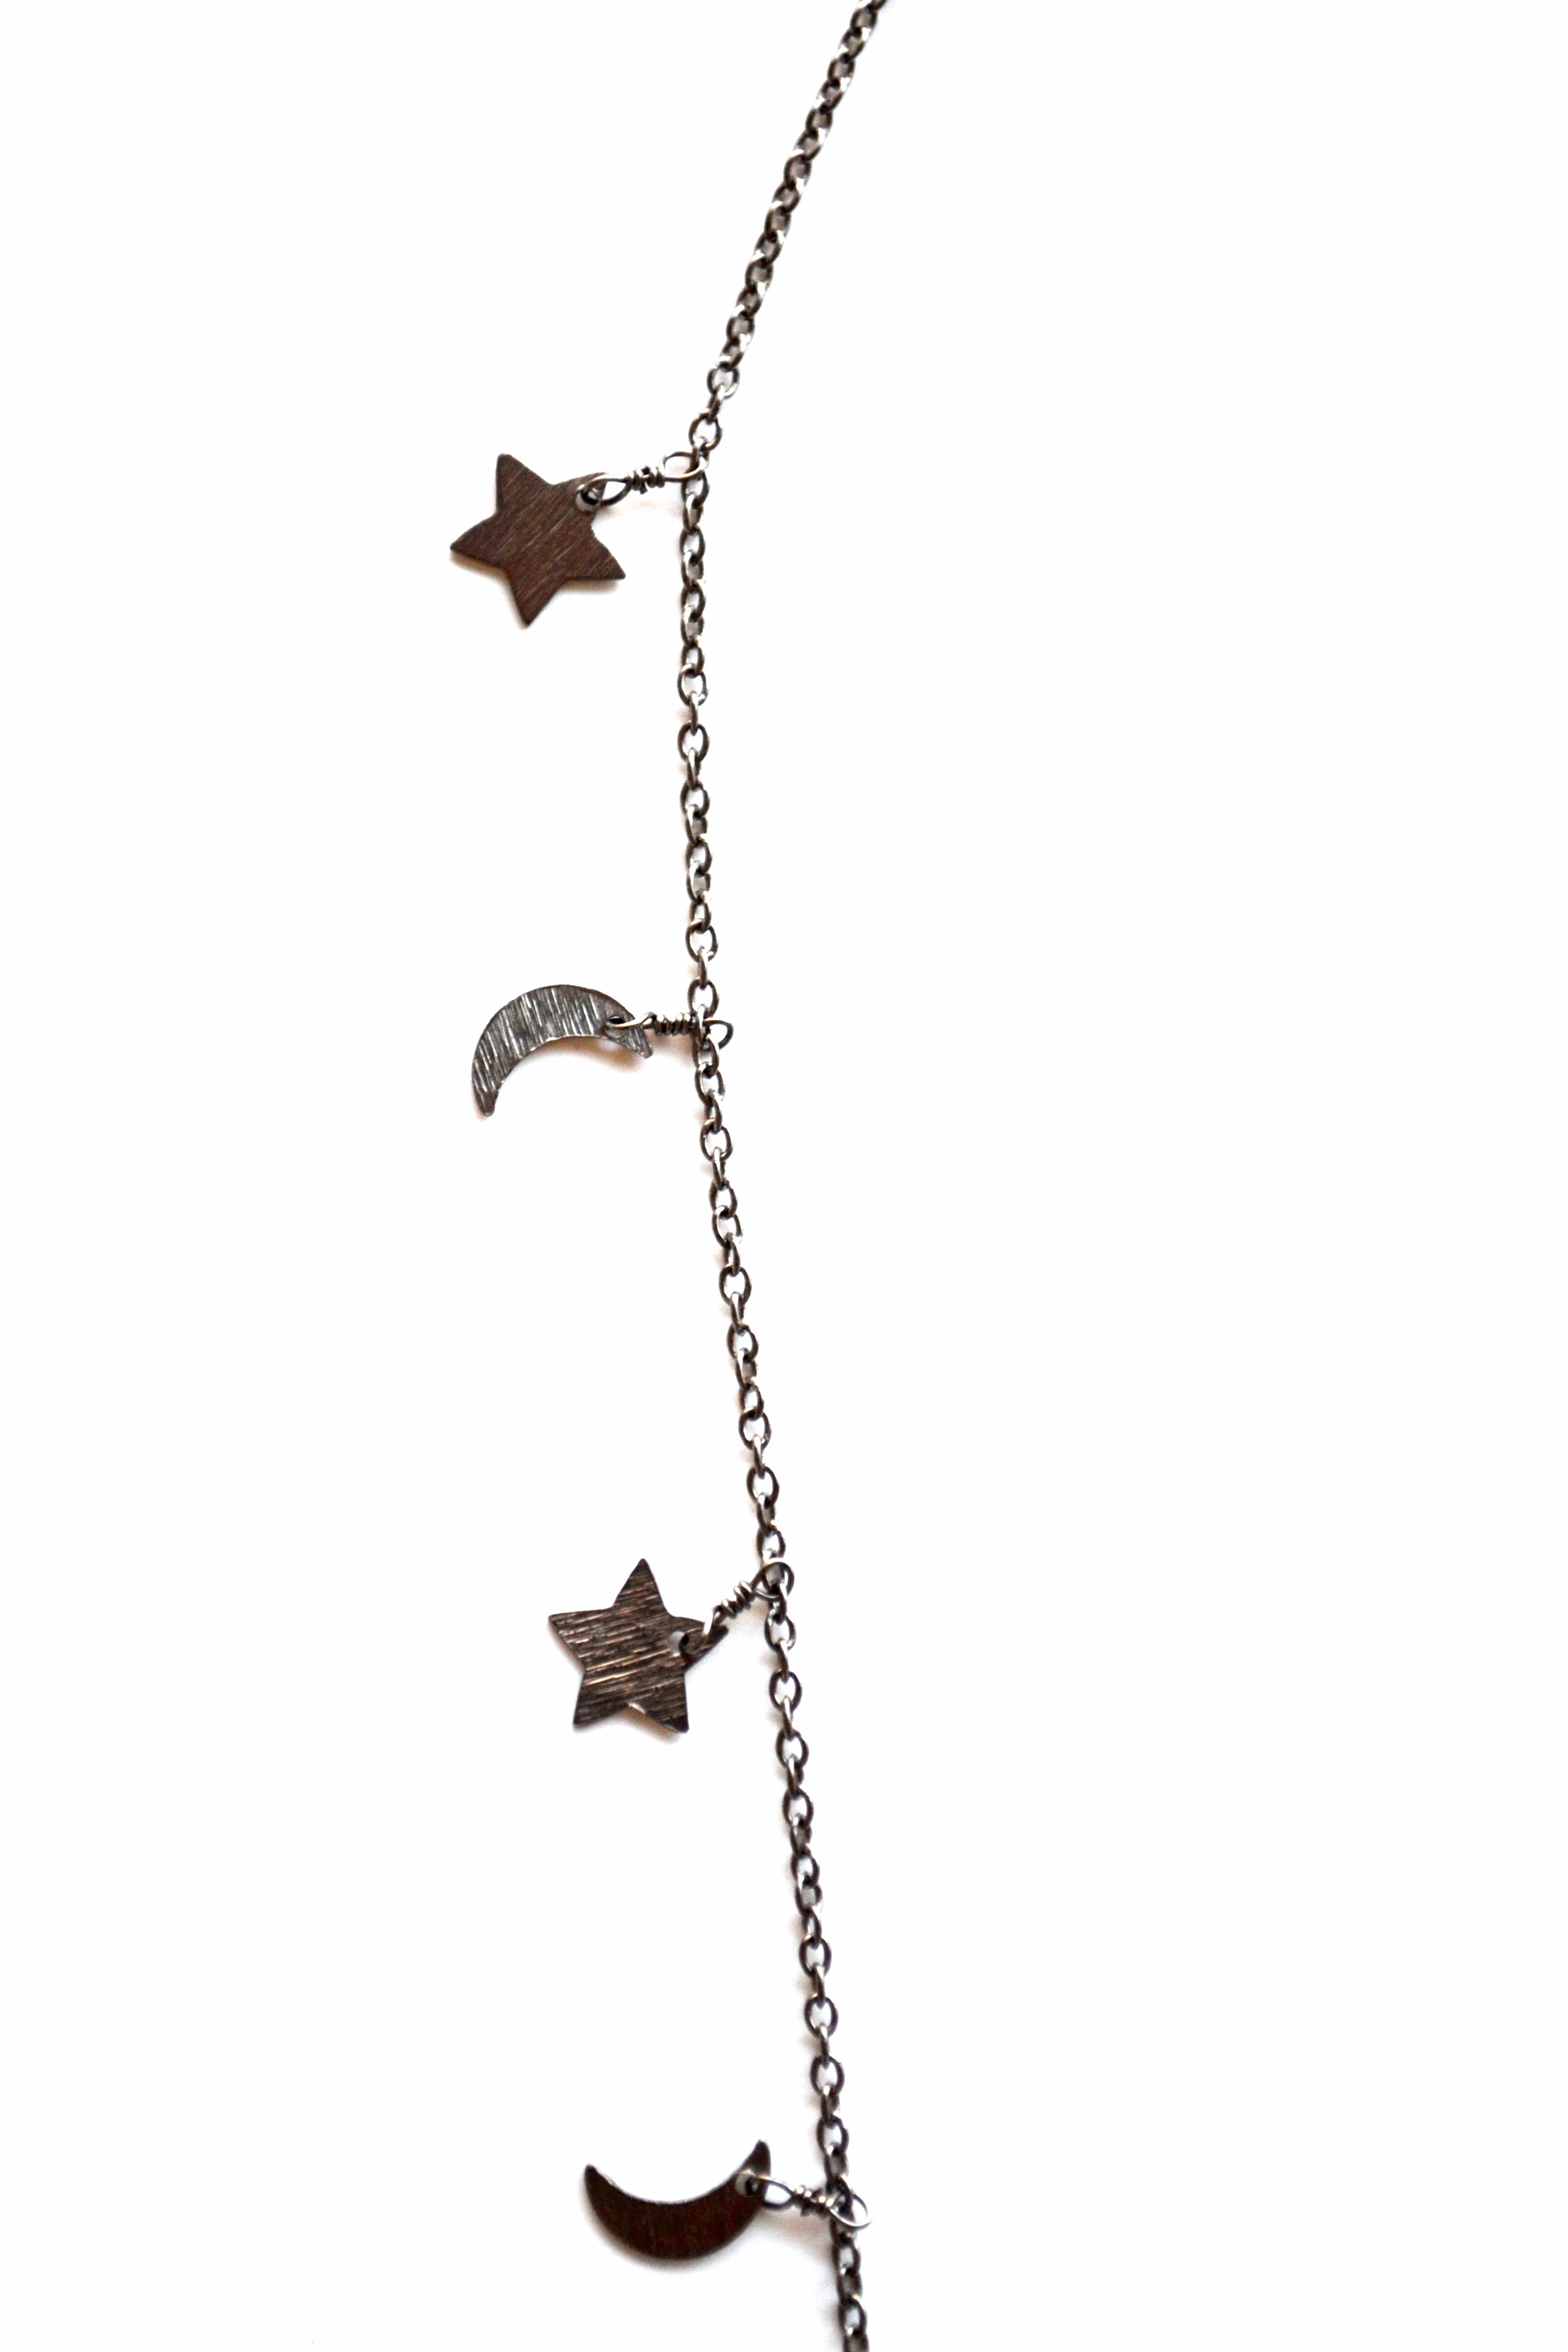 Oxidized Sterling Silver Celestial Star & Moon Necklace with a Peace Sign Charm